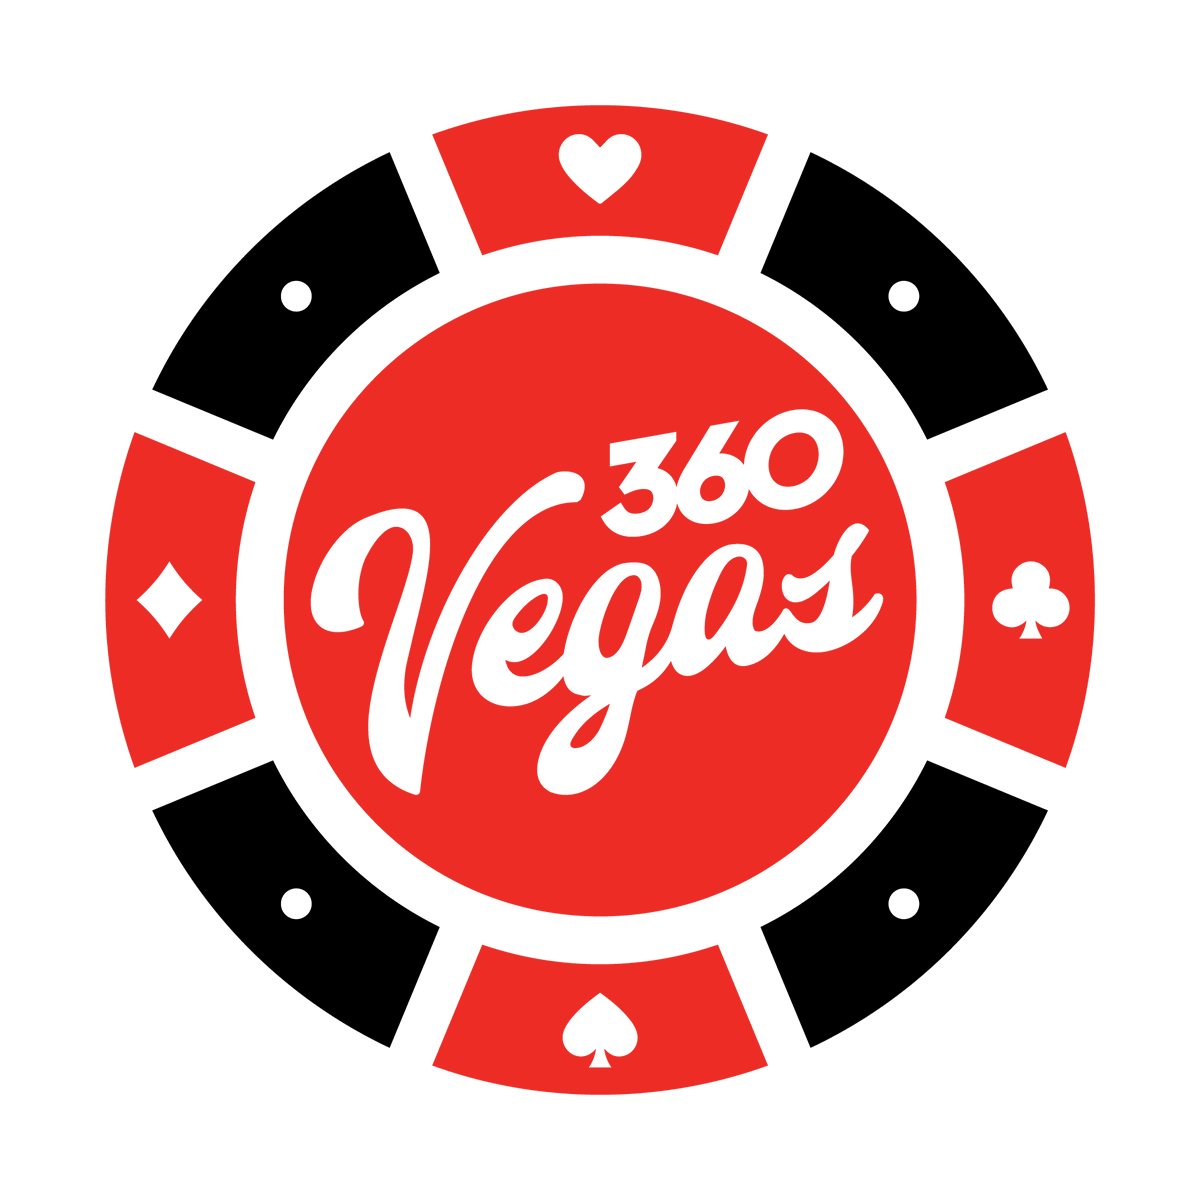 Our '360 POV' series on the Martin Scorsese film 'Casino' can now enjoy the entire 20 episode, 2 hour, video series via a YouTube playlist created for and available EXCLUSIVELY to subscribers at Patreon.com/360Vegas 

Thank you for supporting what we do

#360VIP #360POV